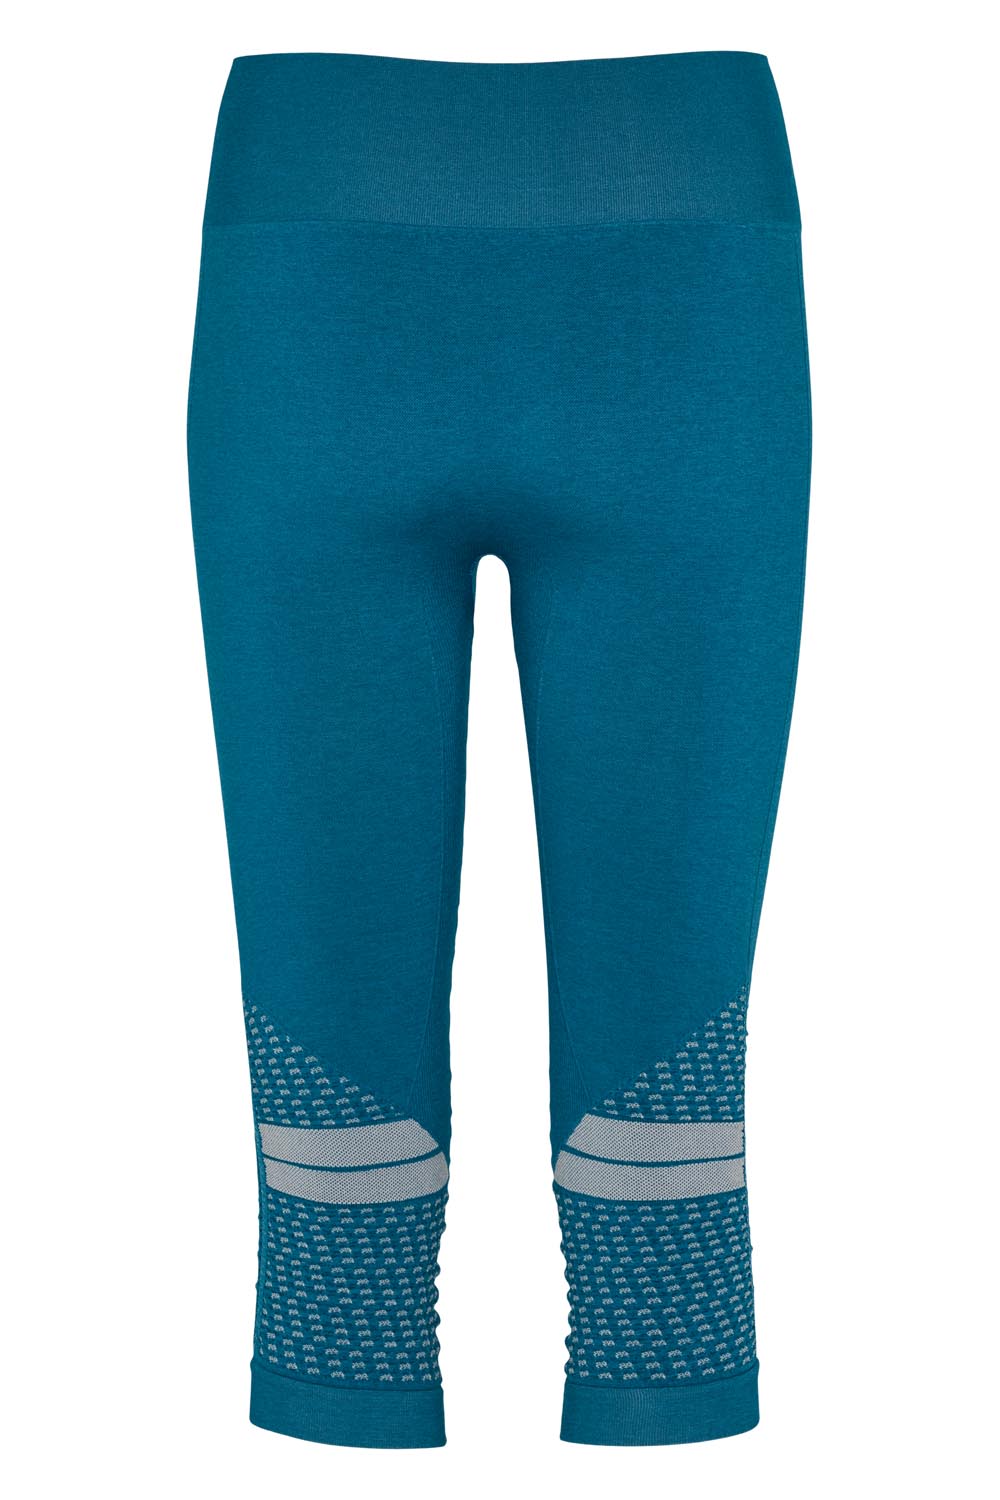 Beluga Classic Tights 3/4 - Back - Harbour Blue